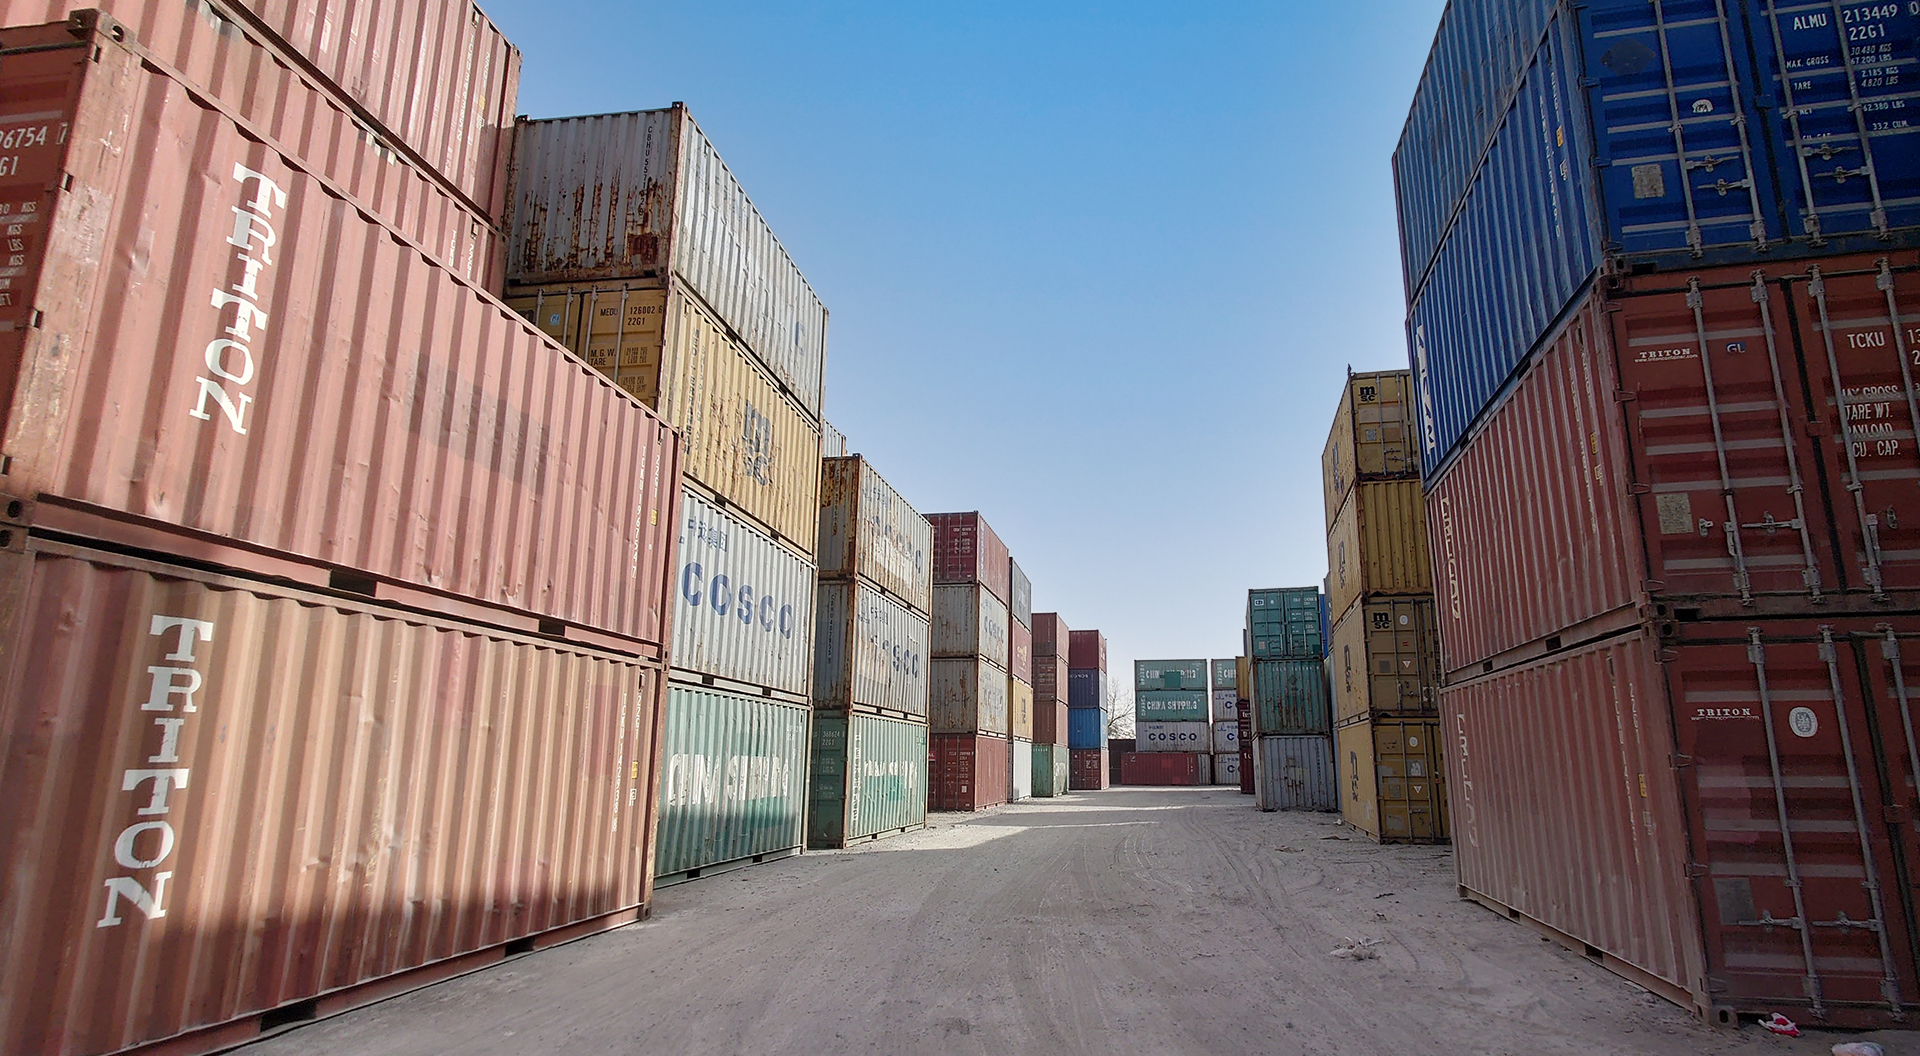 Shipping container depot in Dubai and Doha